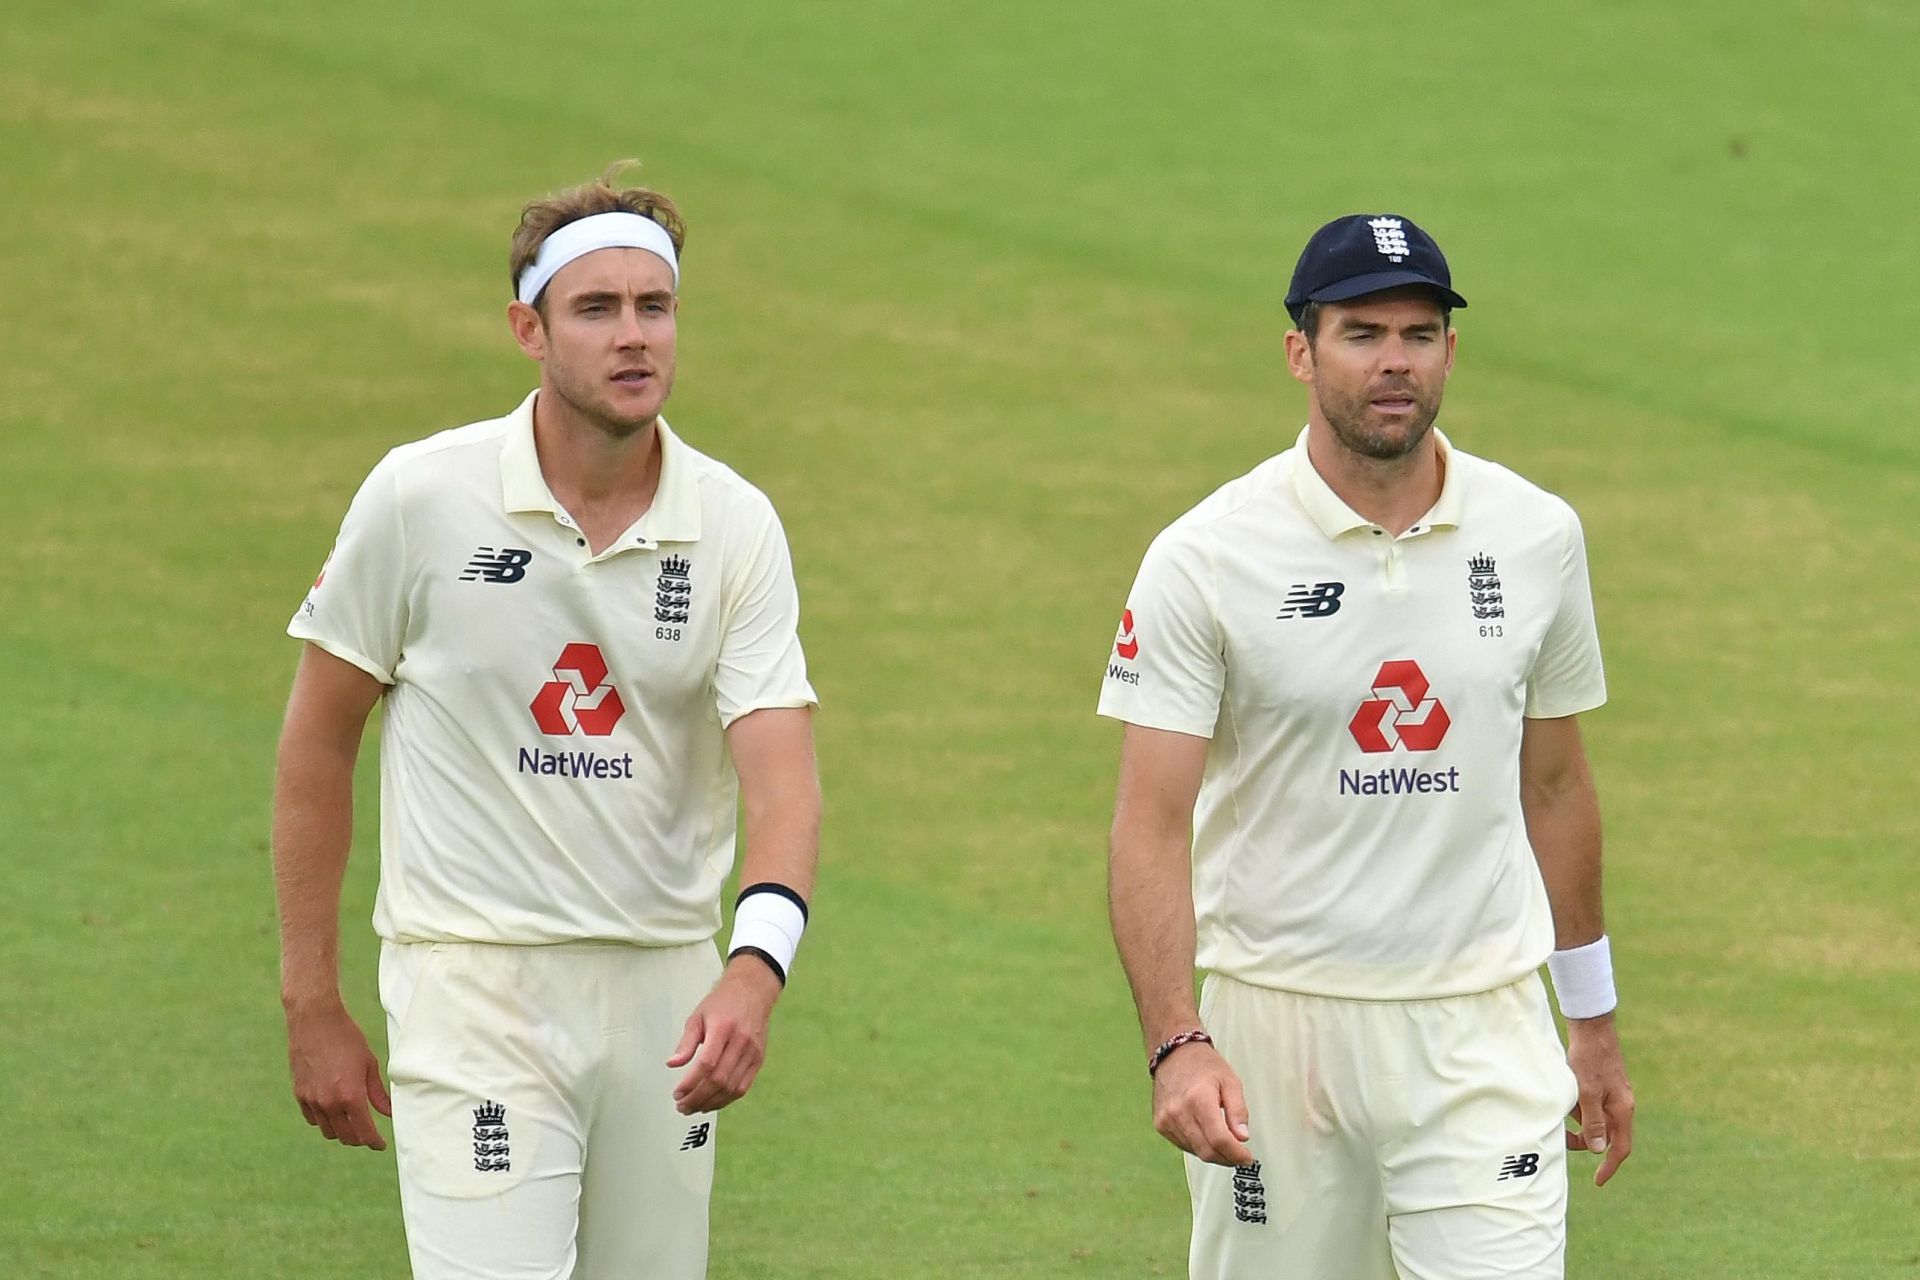 Jimmy Anderson and Stuart Broad may be playing for the last time against India